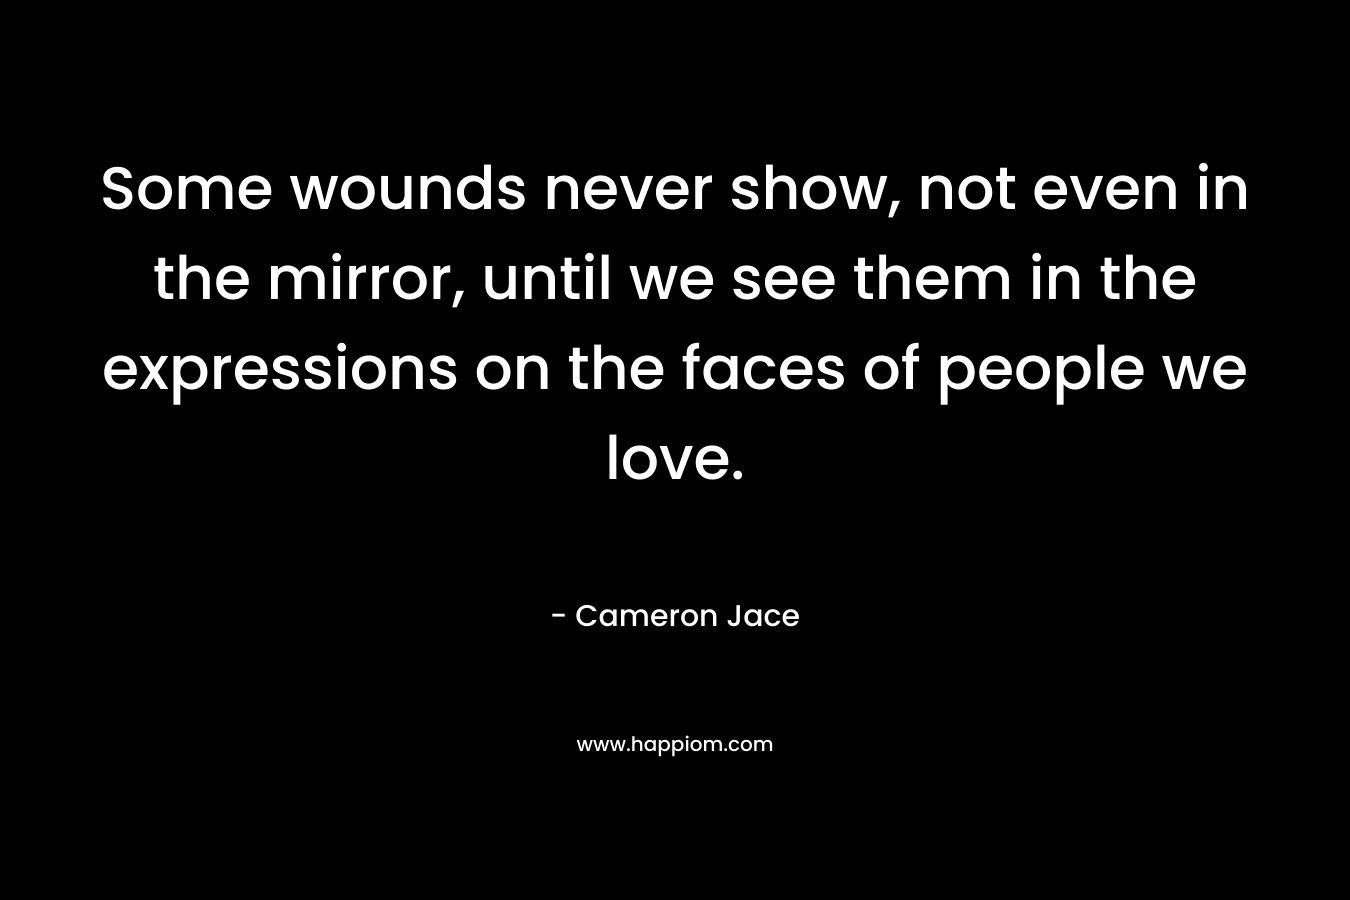 Some wounds never show, not even in the mirror, until we see them in the expressions on the faces of people we love.